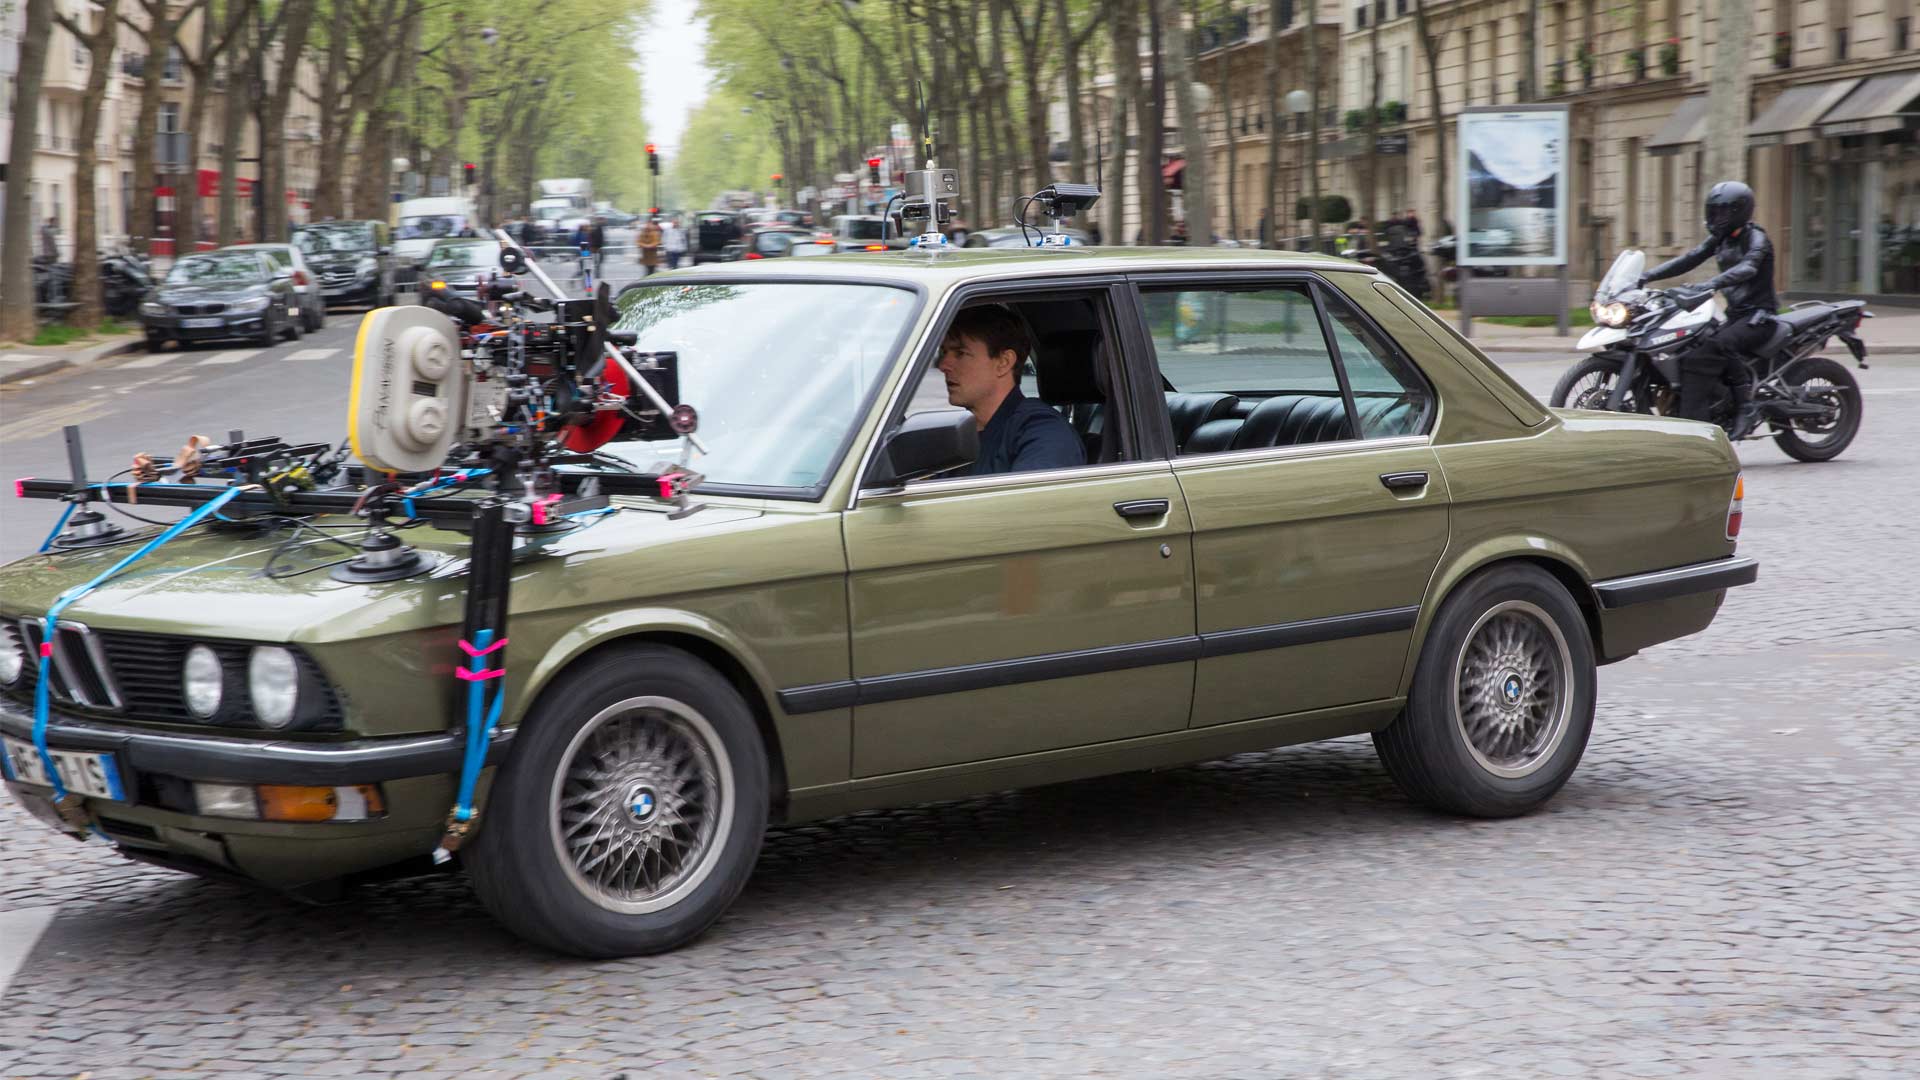 1986-BMW-5-Series-Tom-Cruise-Mission-Impossible-Fallout